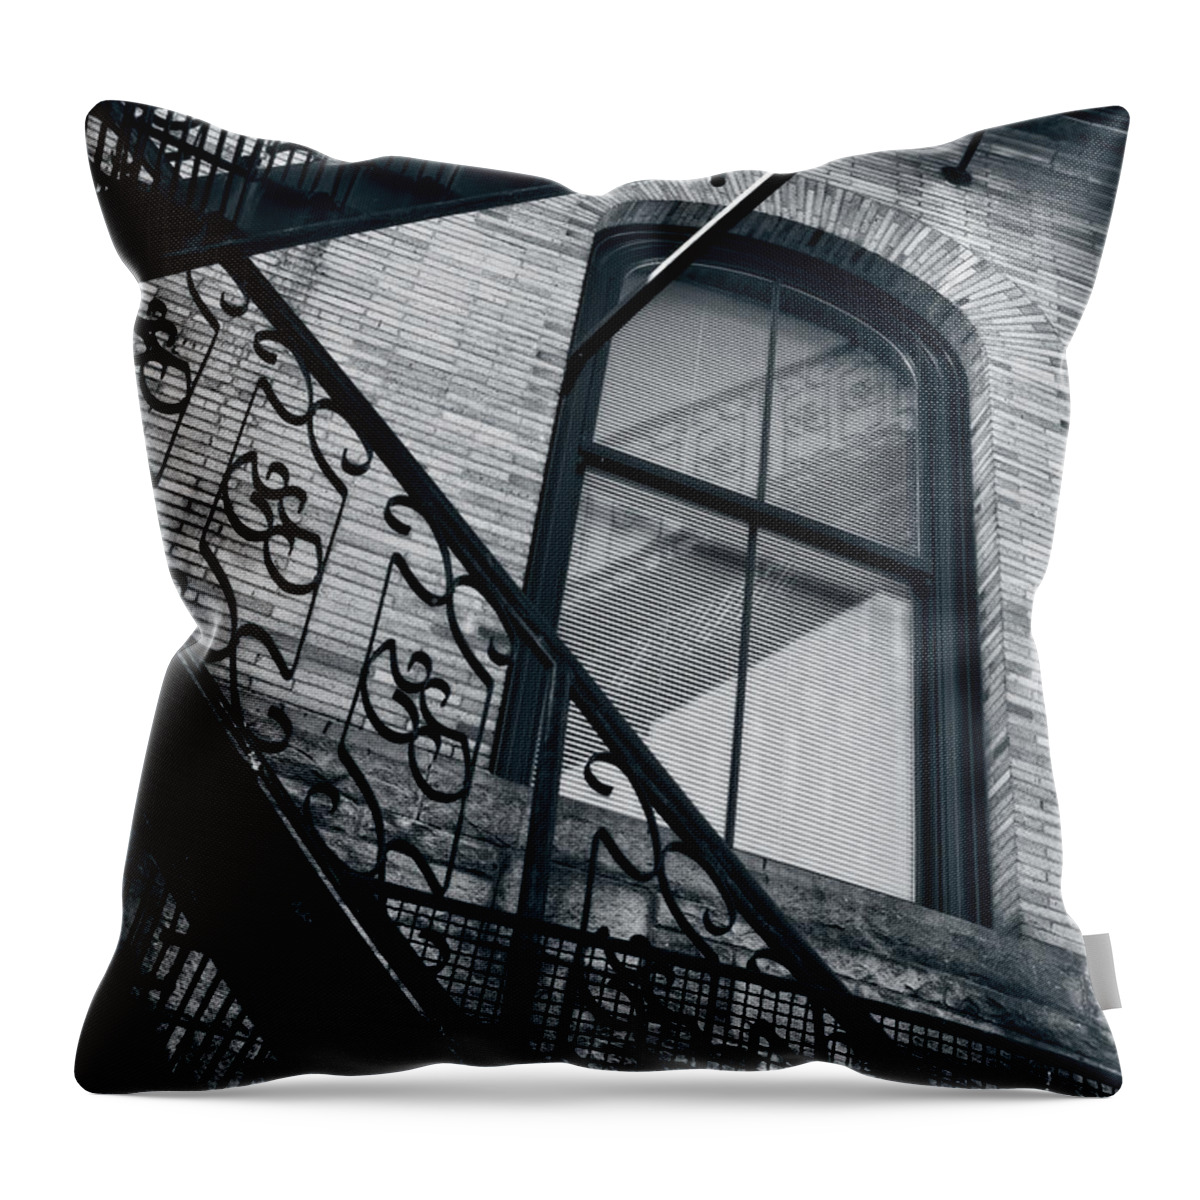 Black And White Throw Pillow featuring the photograph The Fire Escape by Judi Kubes